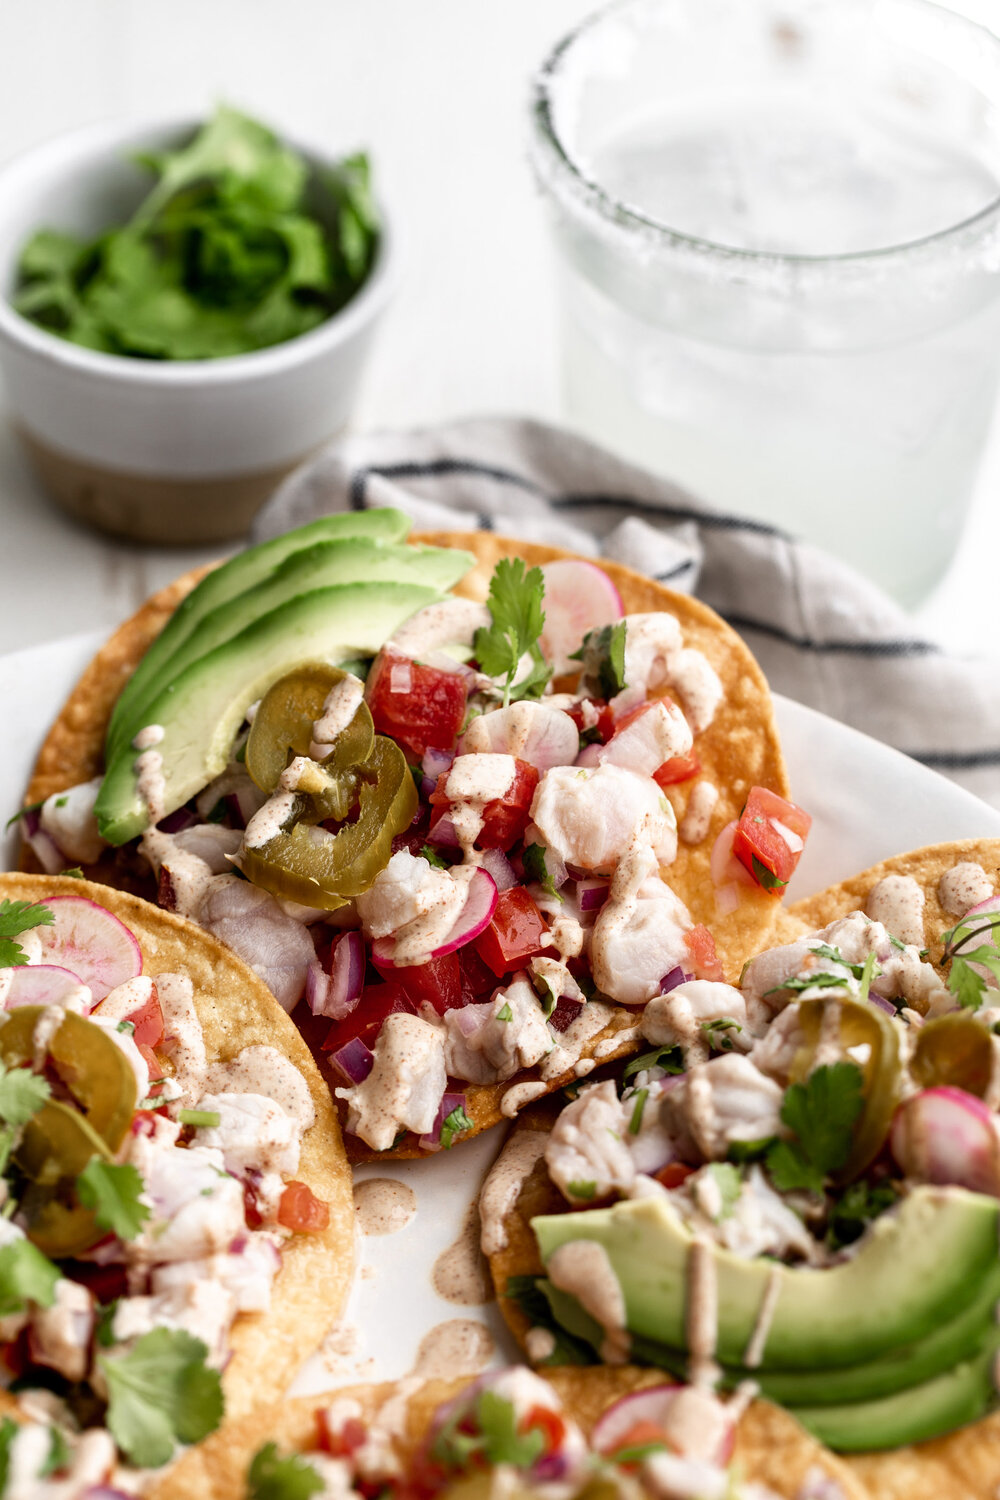 white fish ceviche tostada with jalapeño and avocado